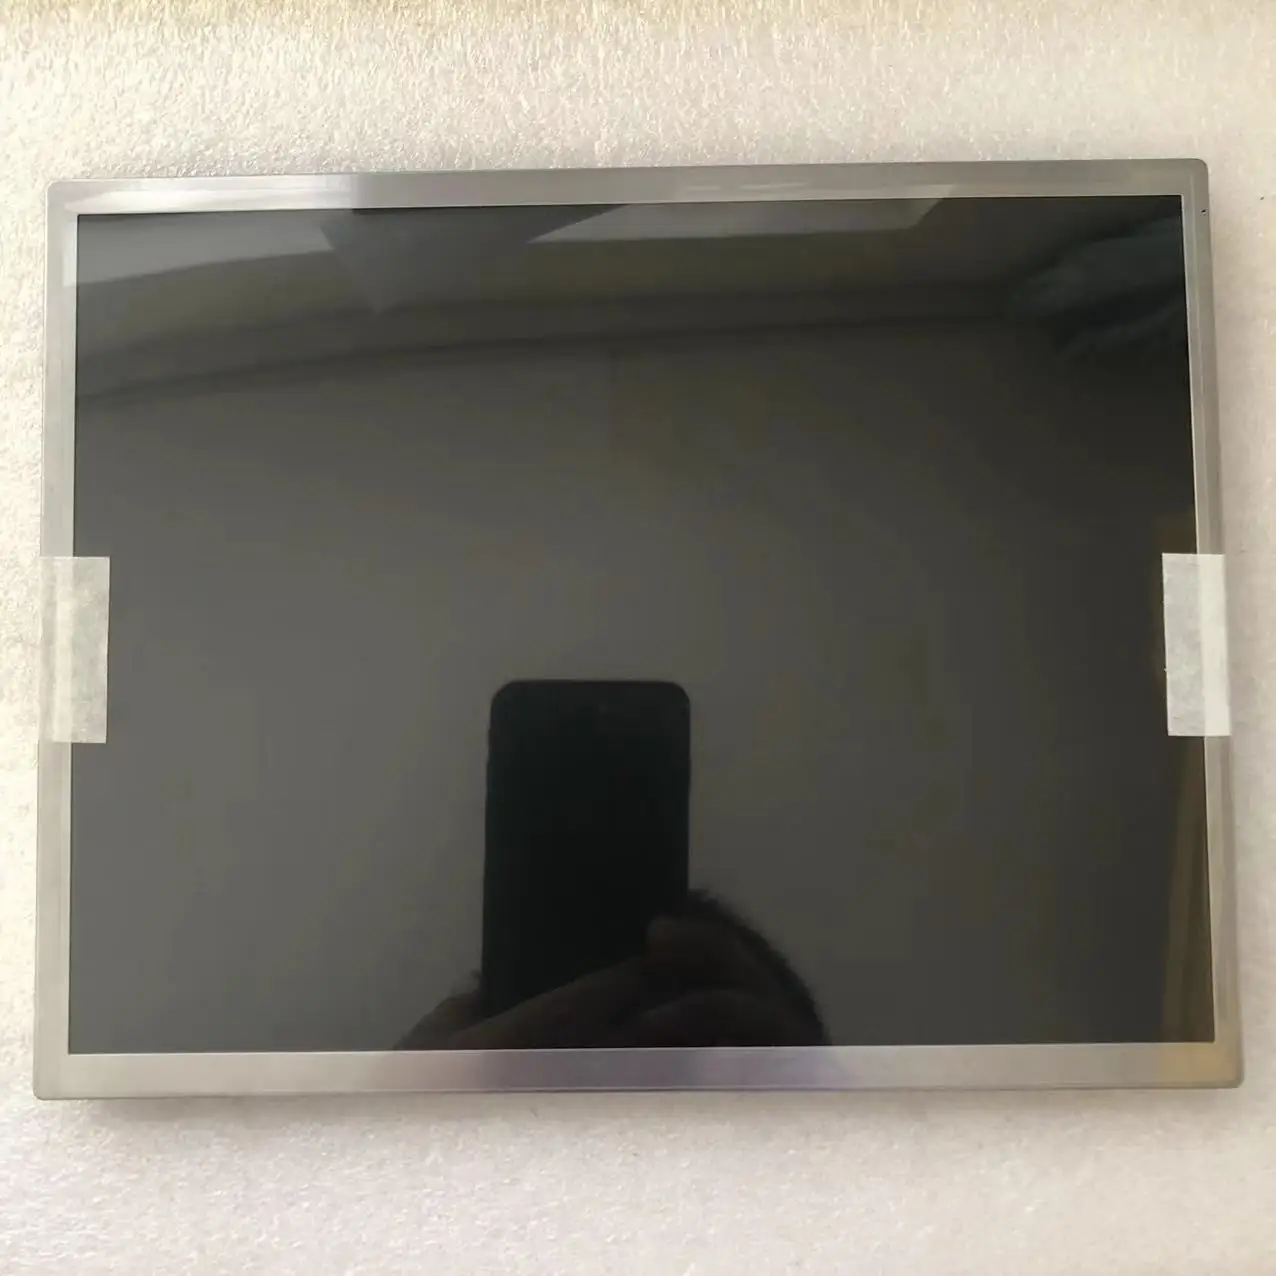 For 8.4-inch NL6448AC33-A1D LCD Screen Display Panel Fully Tested Before Shipment for 9 4 inch lm64c031 lcd display screen panel fully tested before shipment